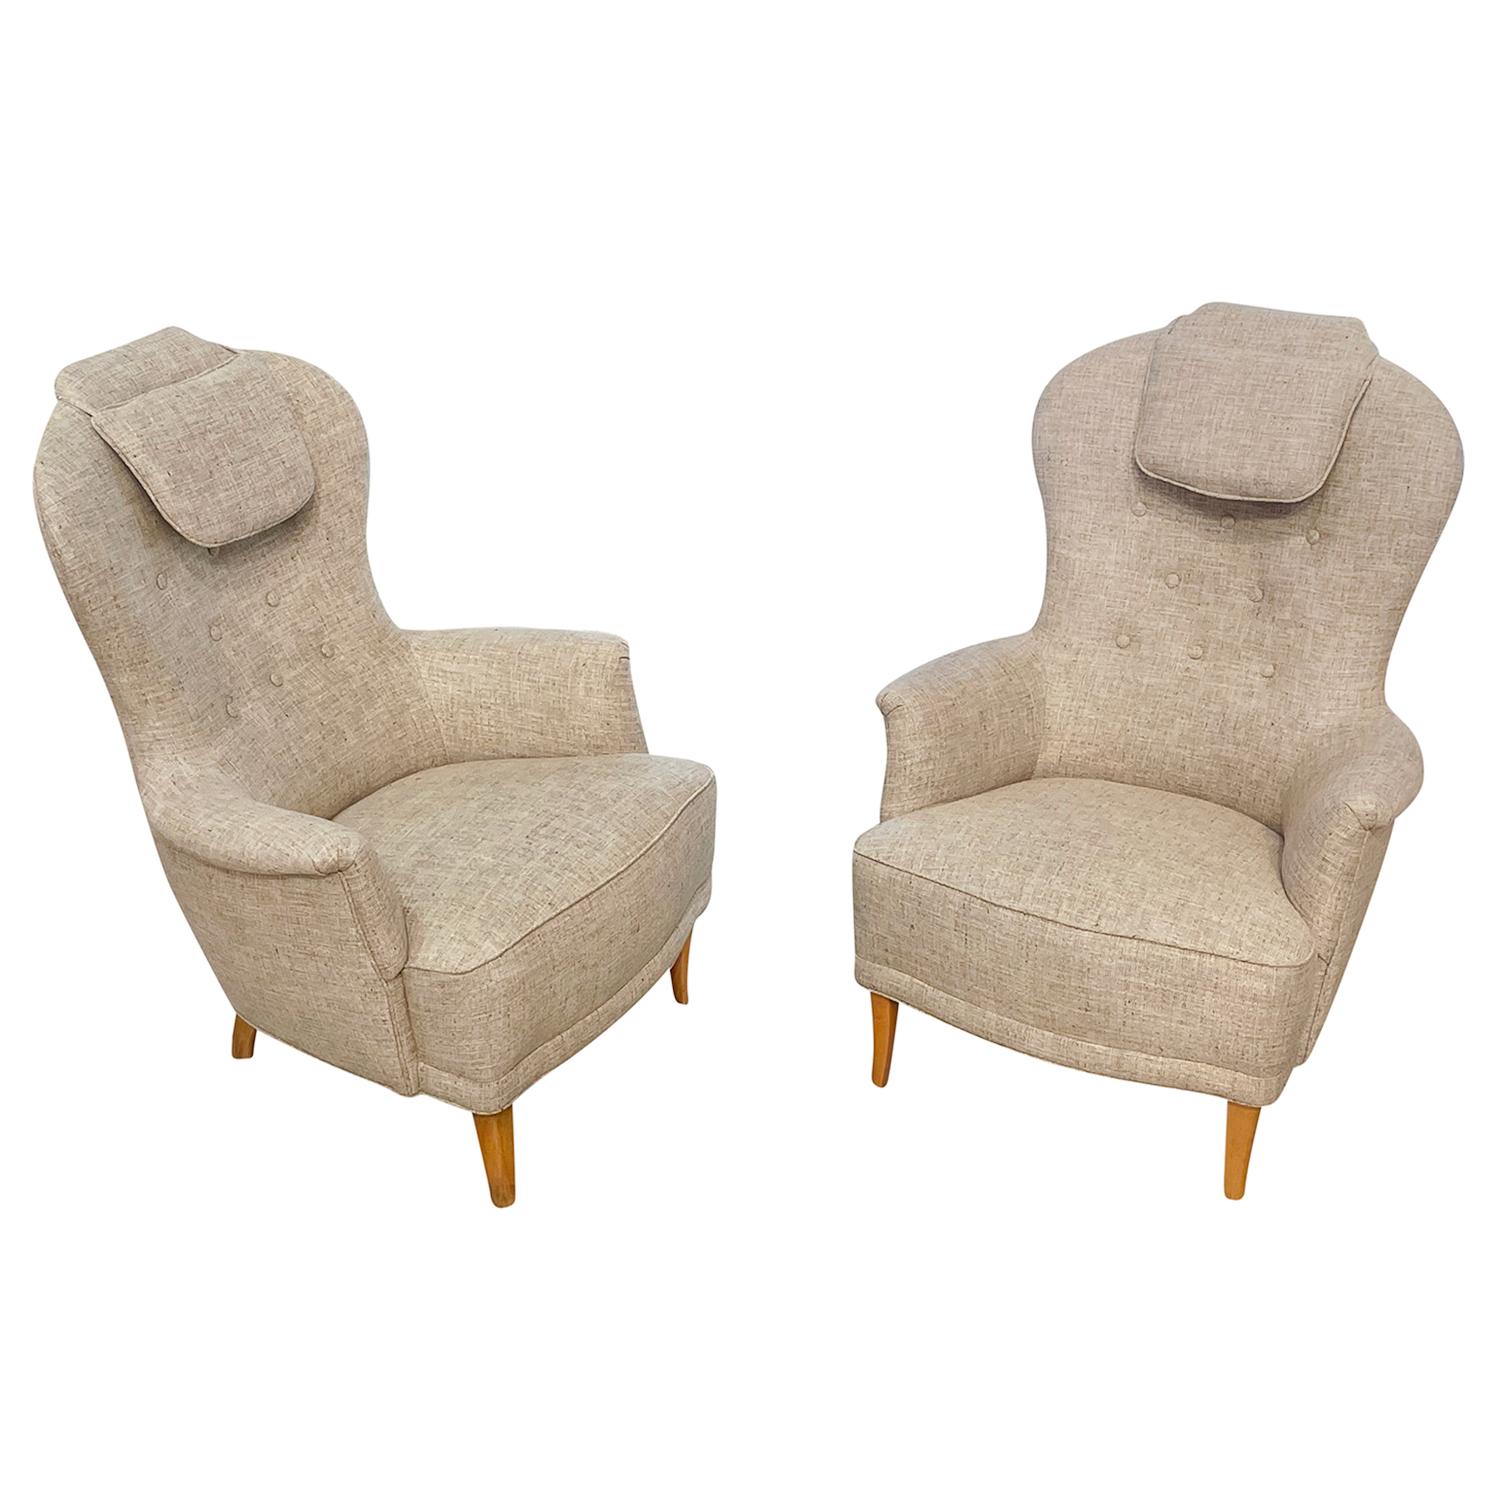 Fabric 20th Century Swedish Pair of Vintage O.H. Sjögren Armchairs by Carl Malmsten For Sale